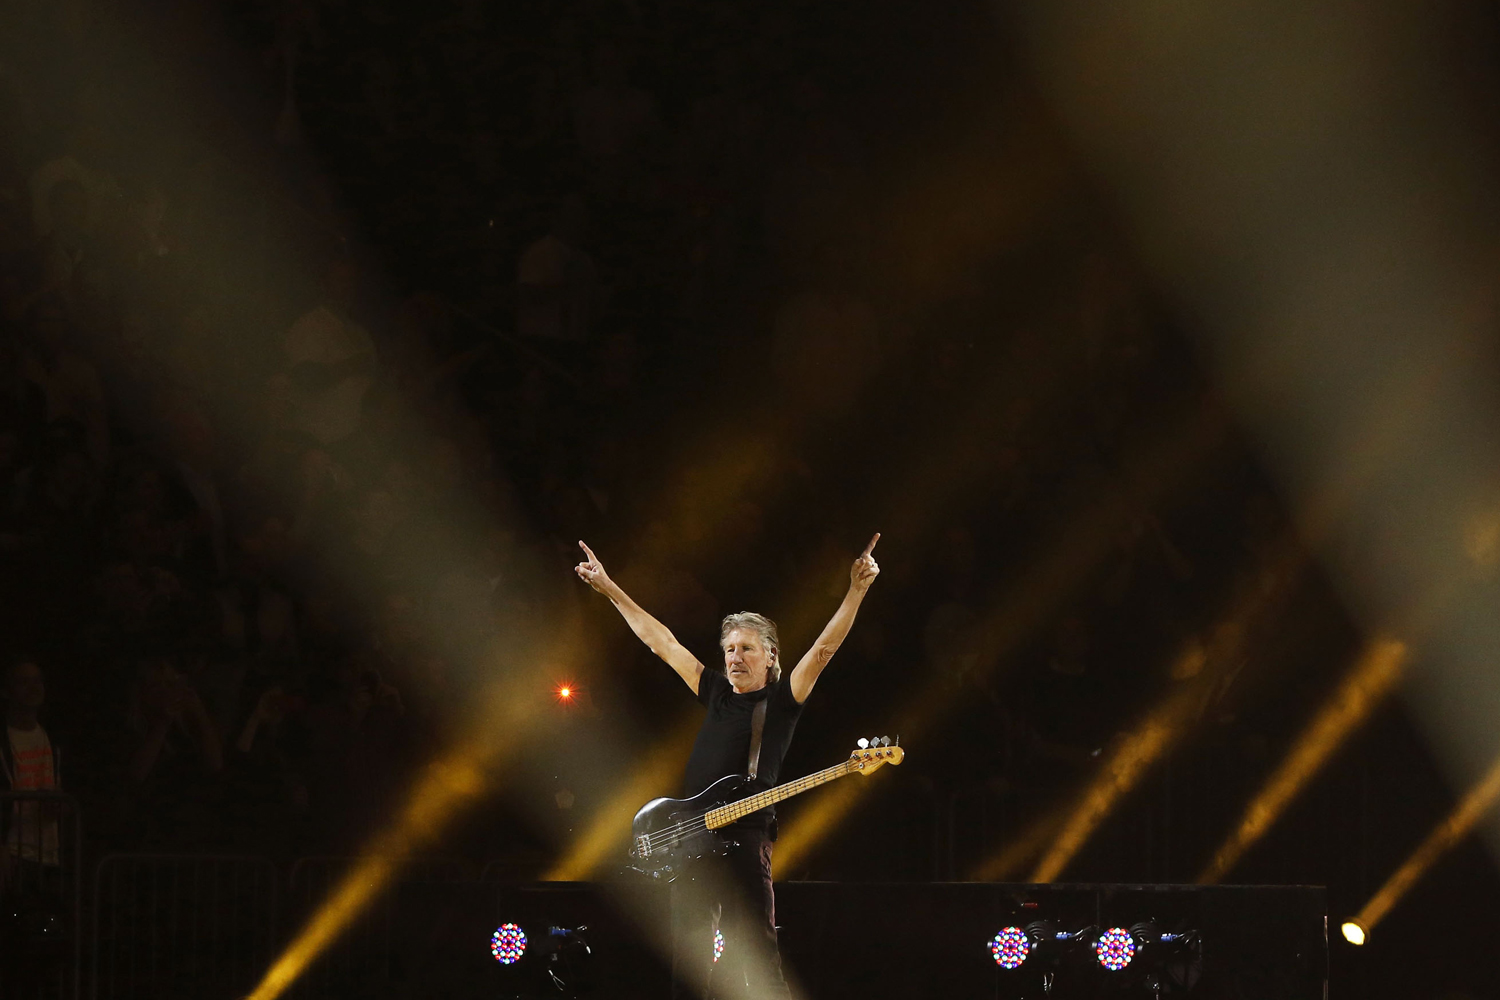 Roger Waters performs during the "12-12-12" benefit concert for victims of Superstorm Sandy at Madison Square Garden in New York